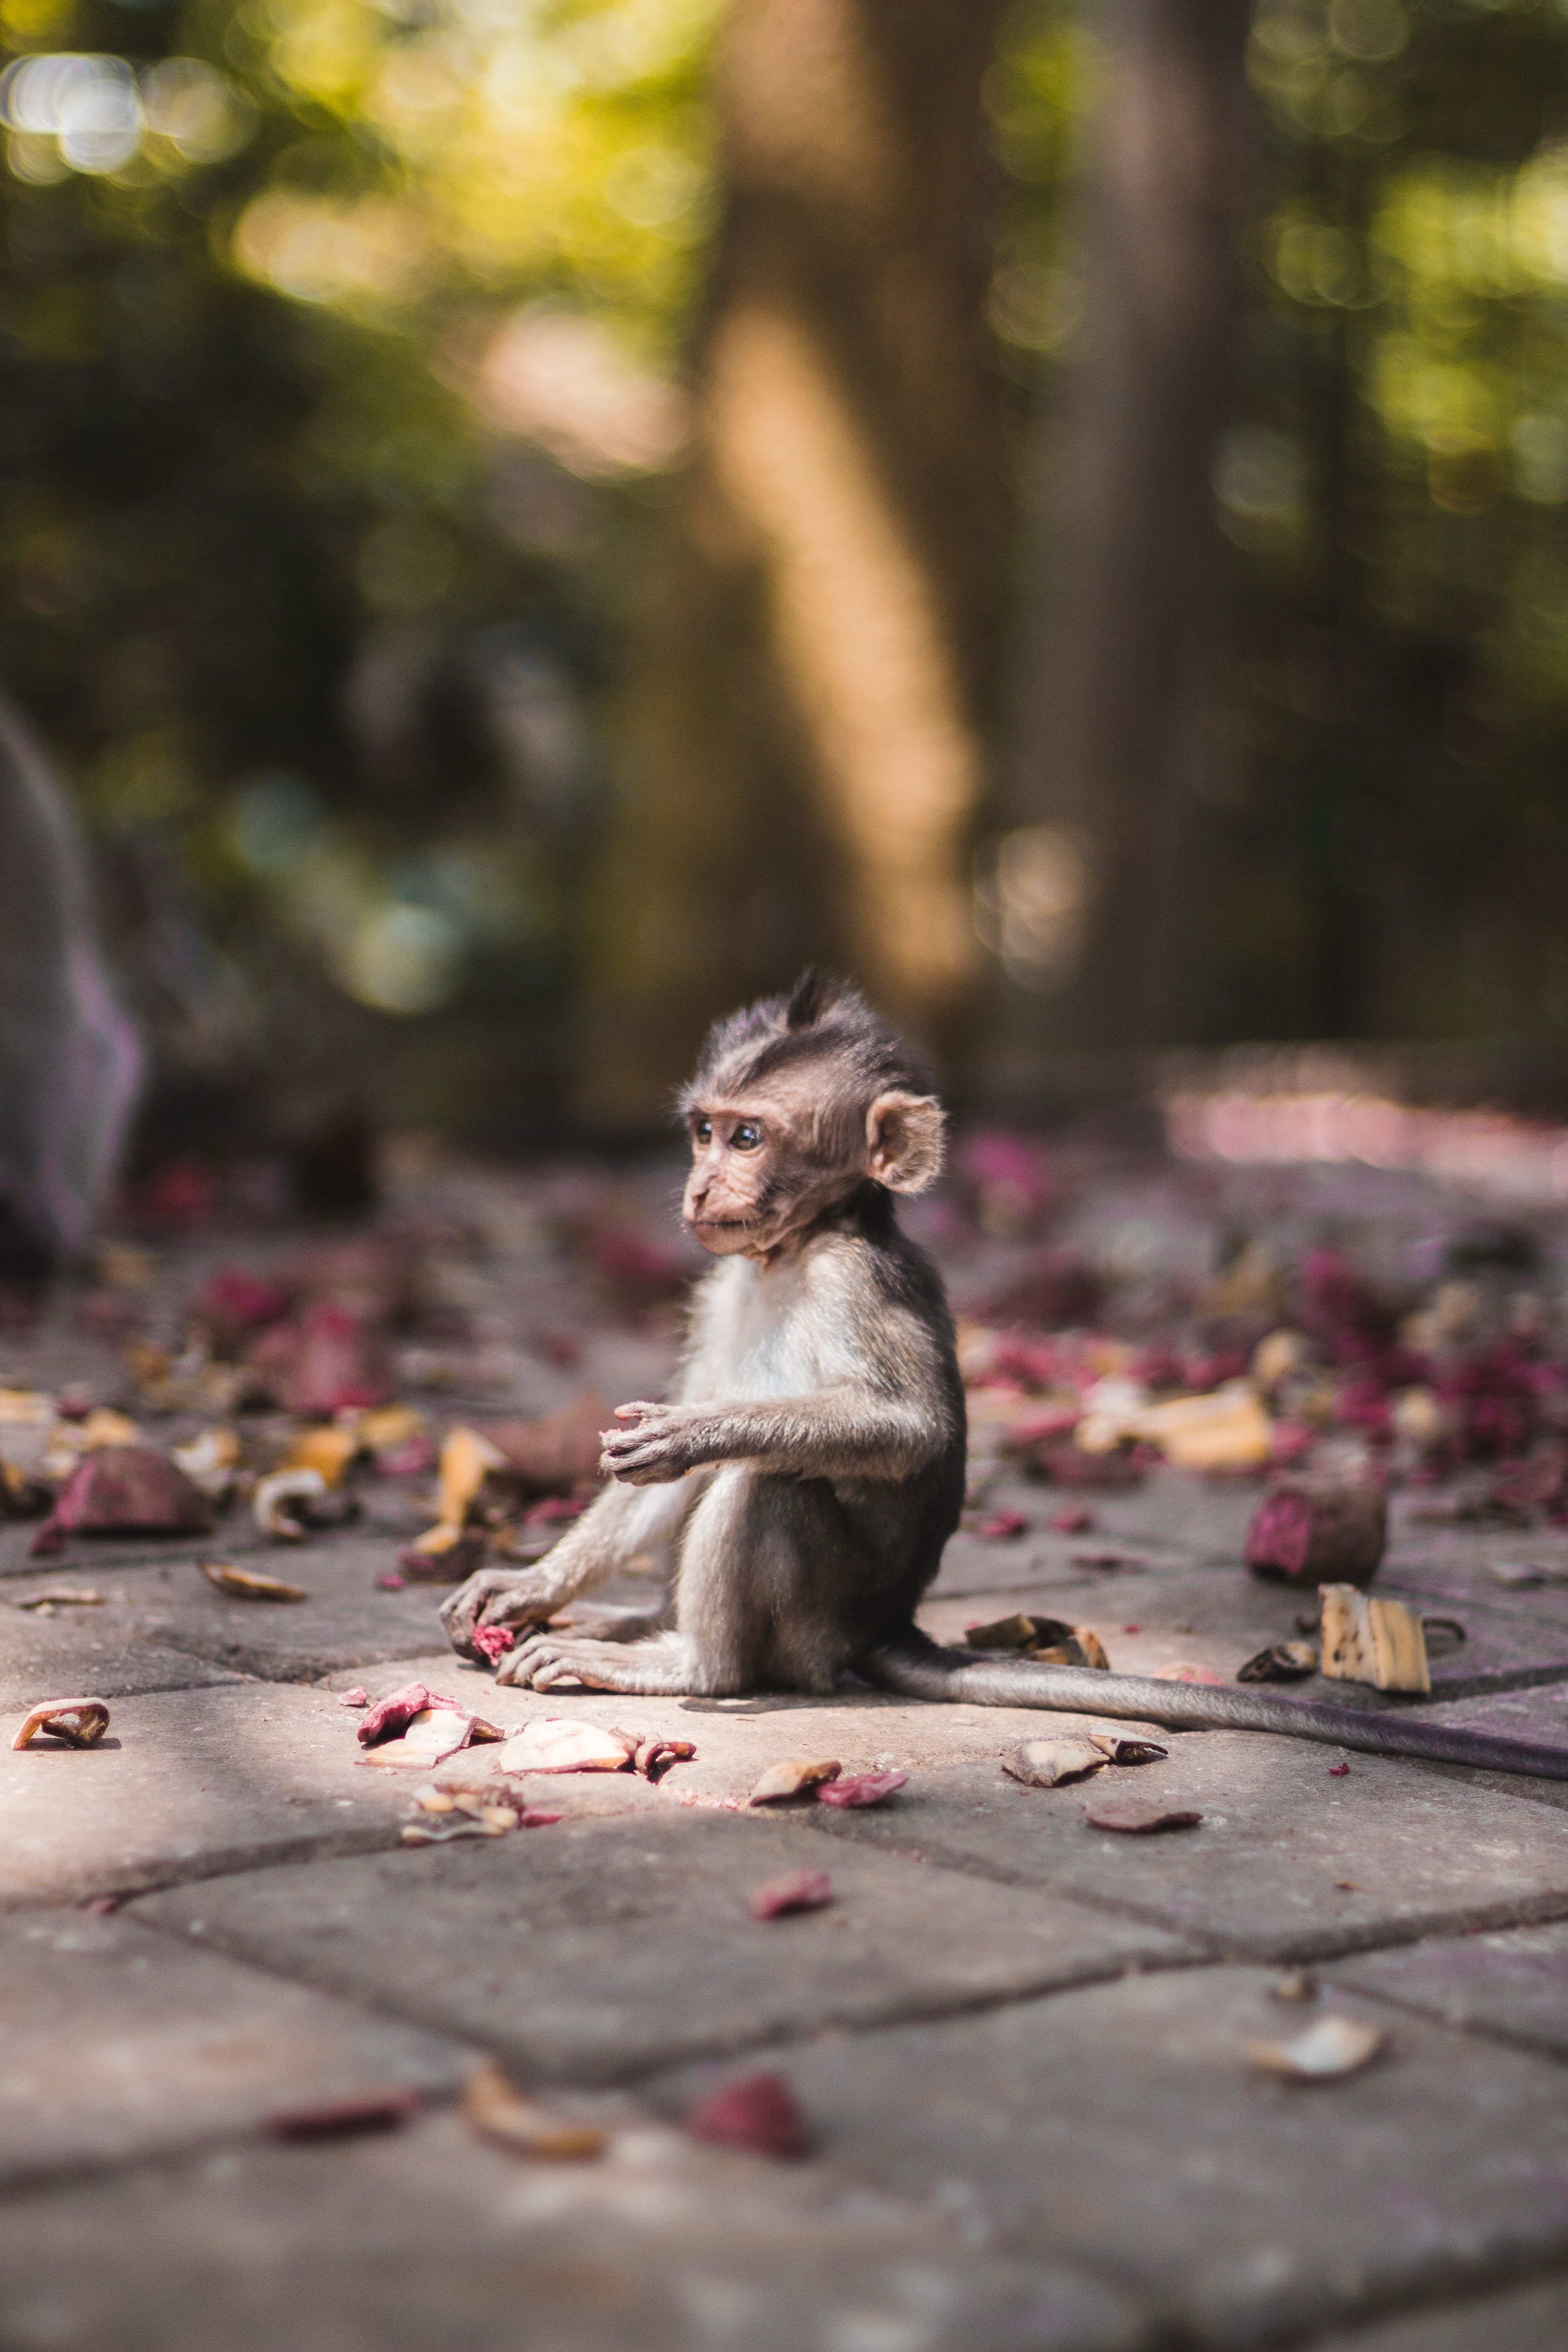 Monkey Picture [HD]. Download Free Image & Stock